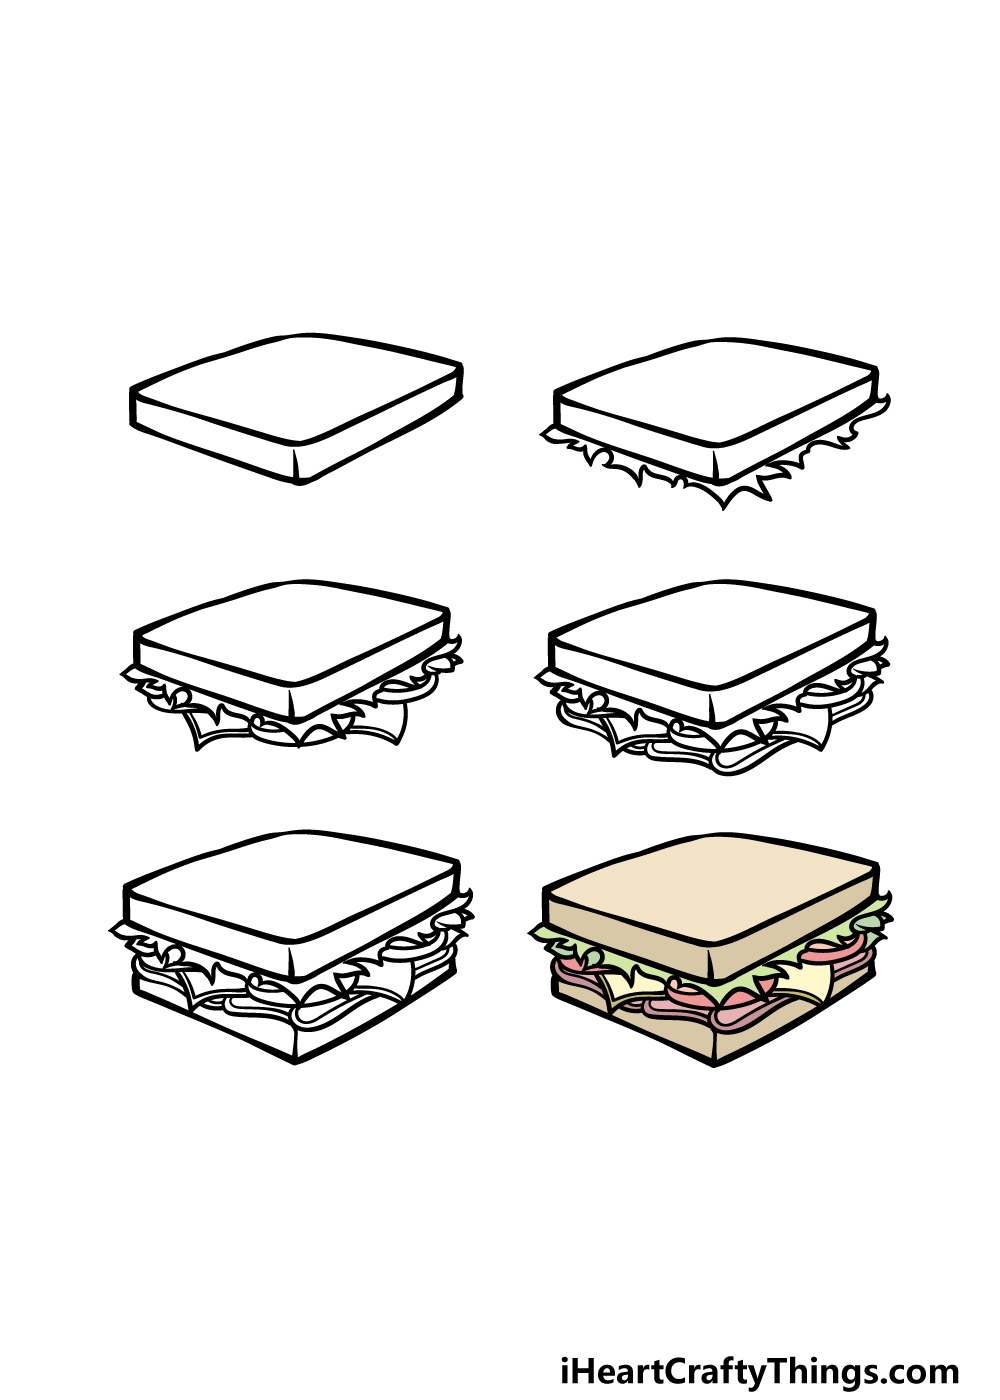 how to draw a Sandwich in 6 steps